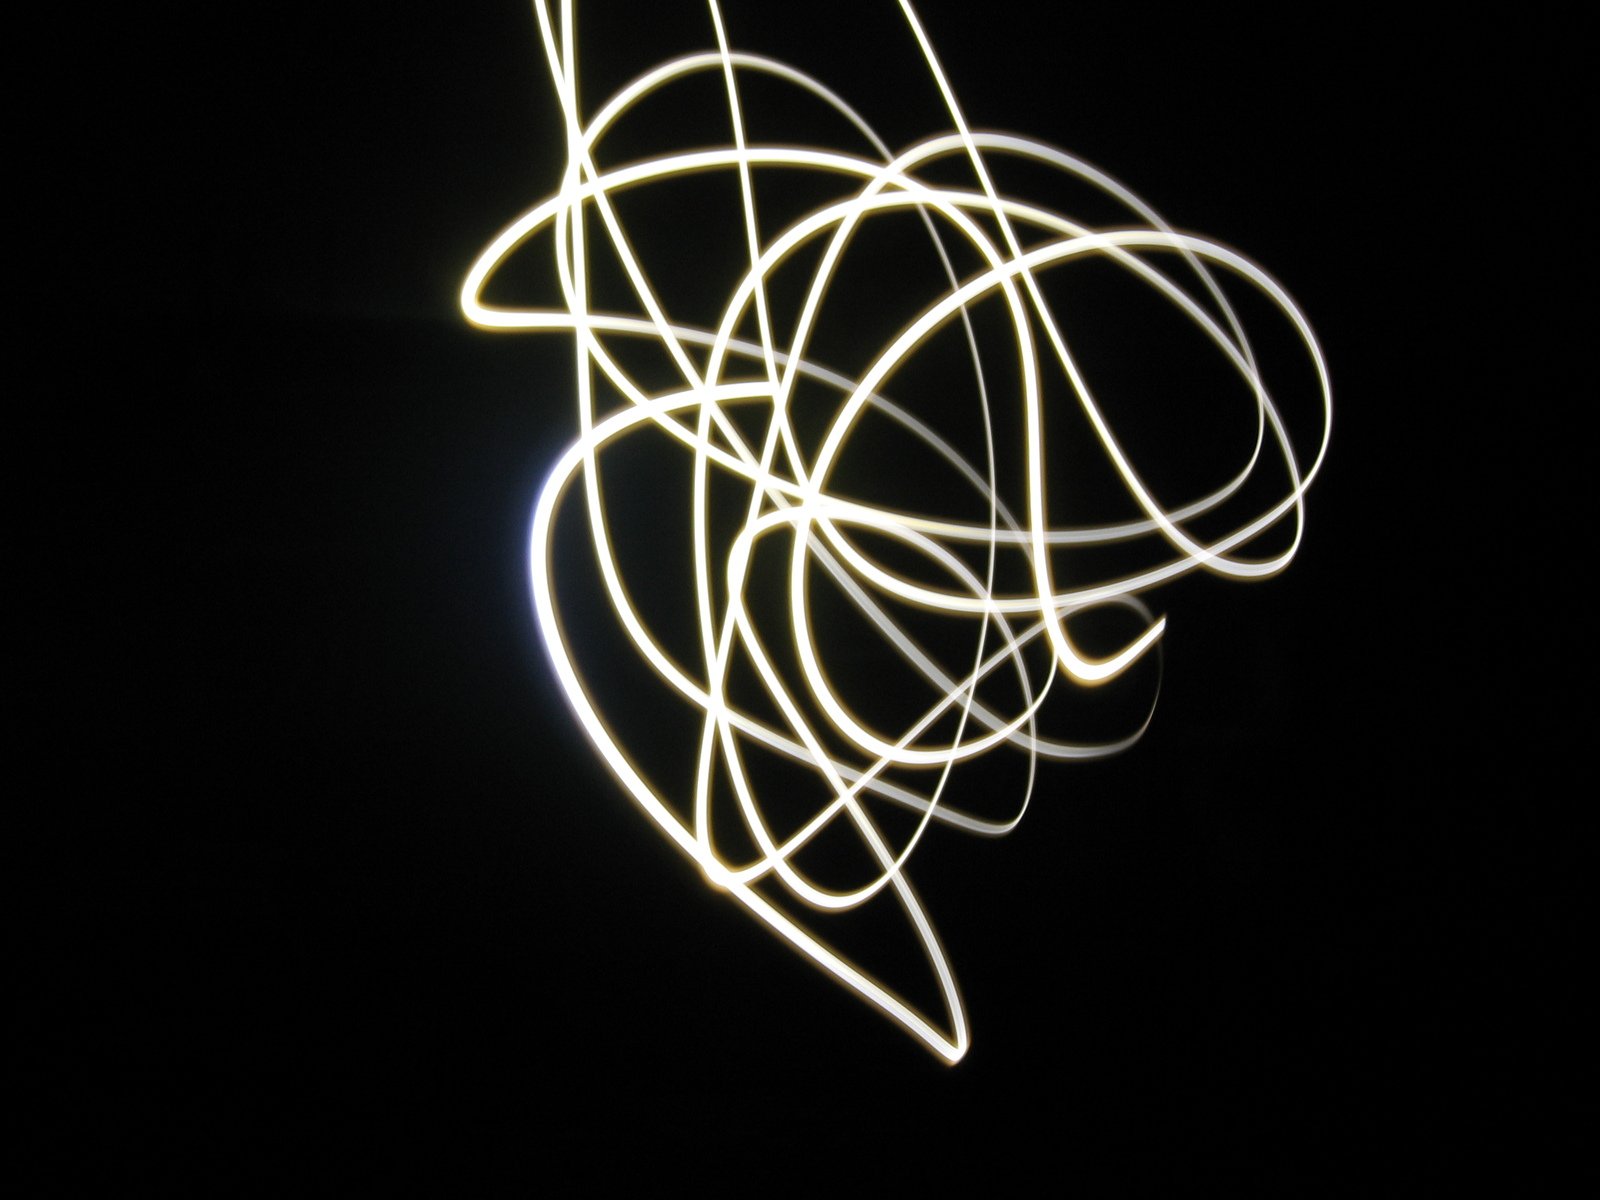 white light is captured through a circular object